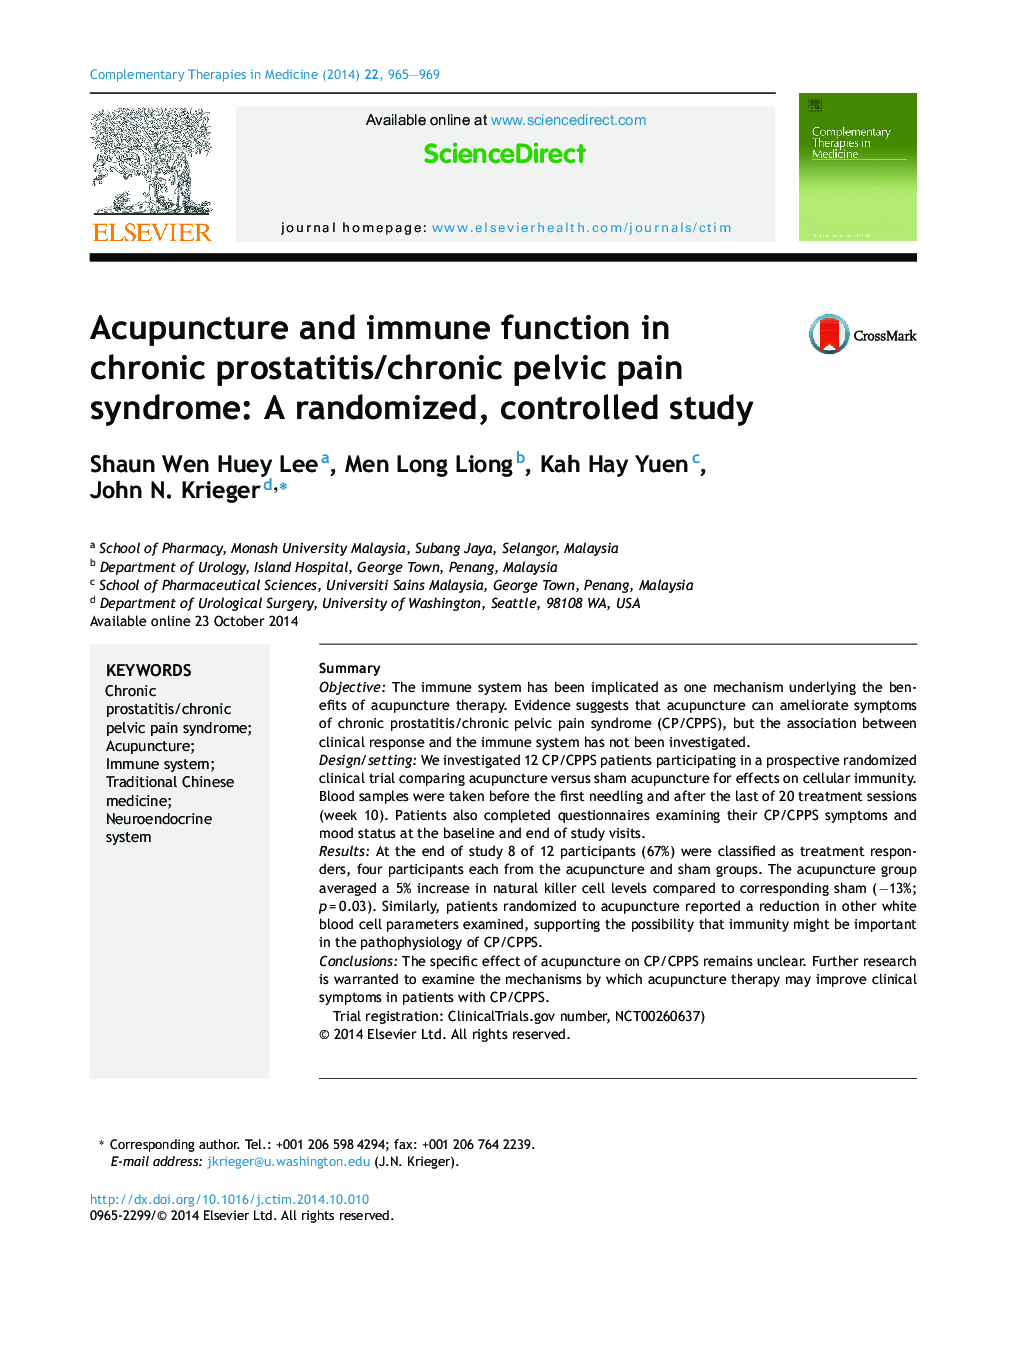 Acupuncture and immune function in chronic prostatitis/chronic pelvic pain syndrome: A randomized, controlled study